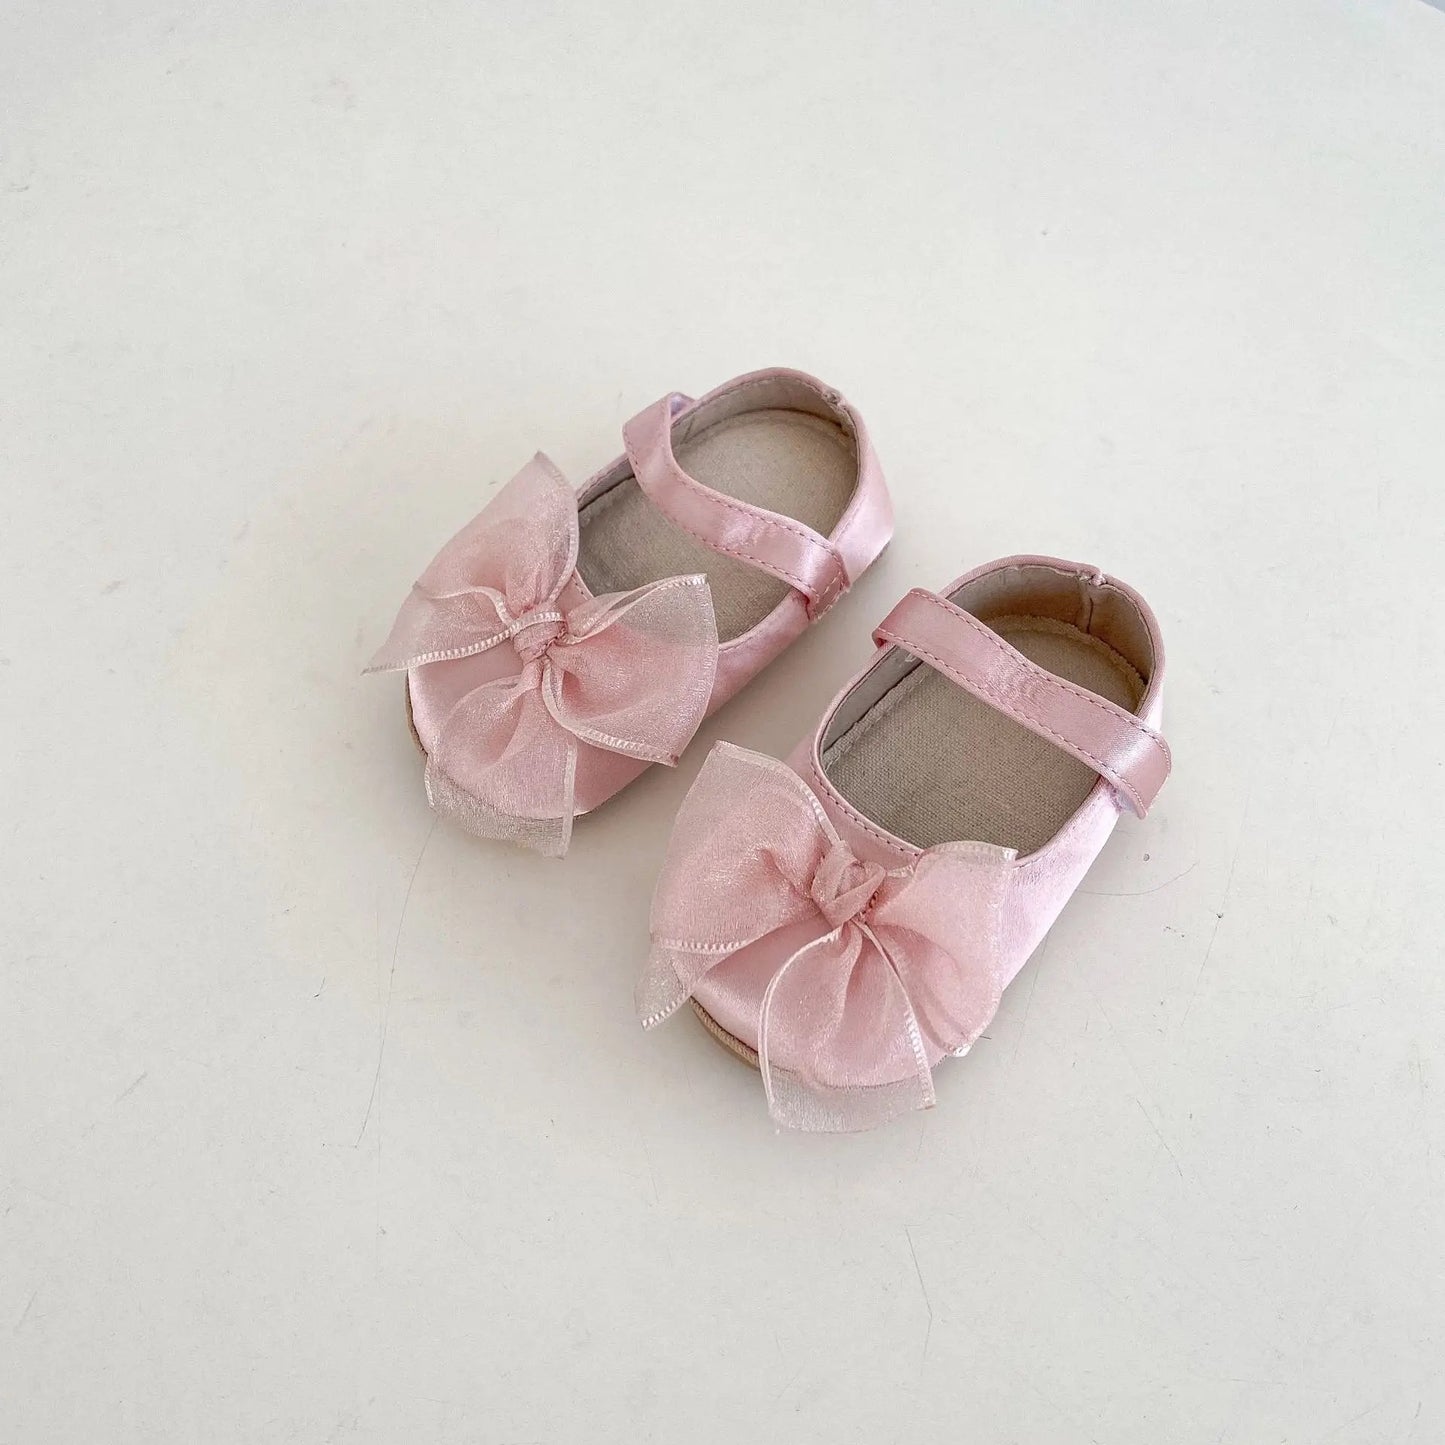 Brynley bow shoes